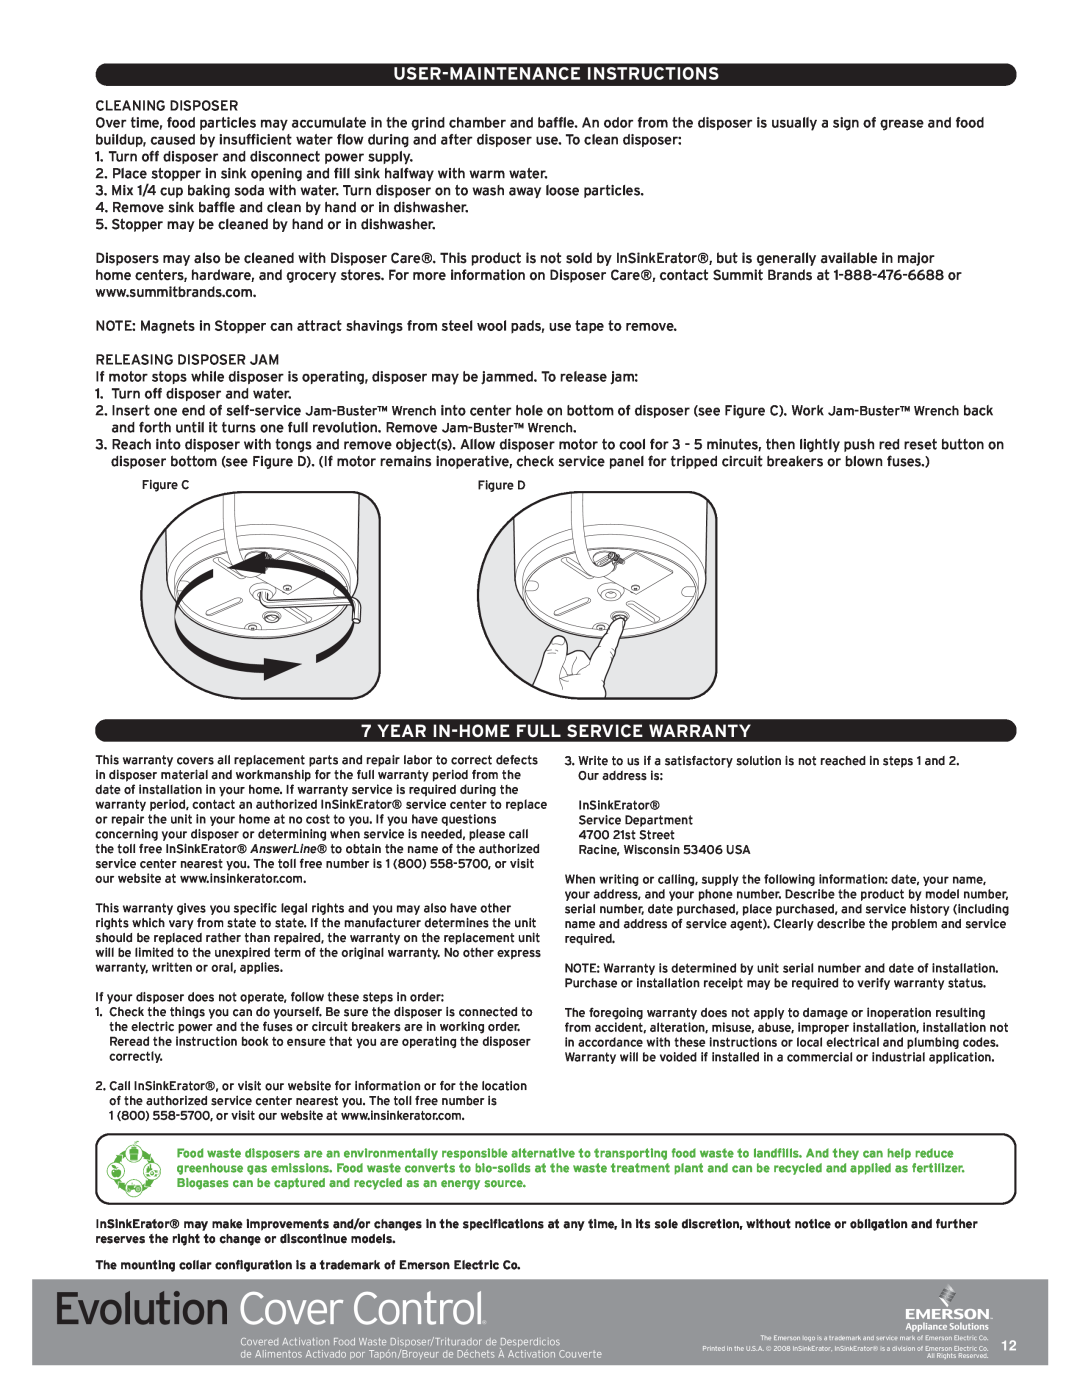 InSinkErator Evolution Series User-Maintenance Instructions, Year In-Home Full Service Warranty, Evolution Cover Control 